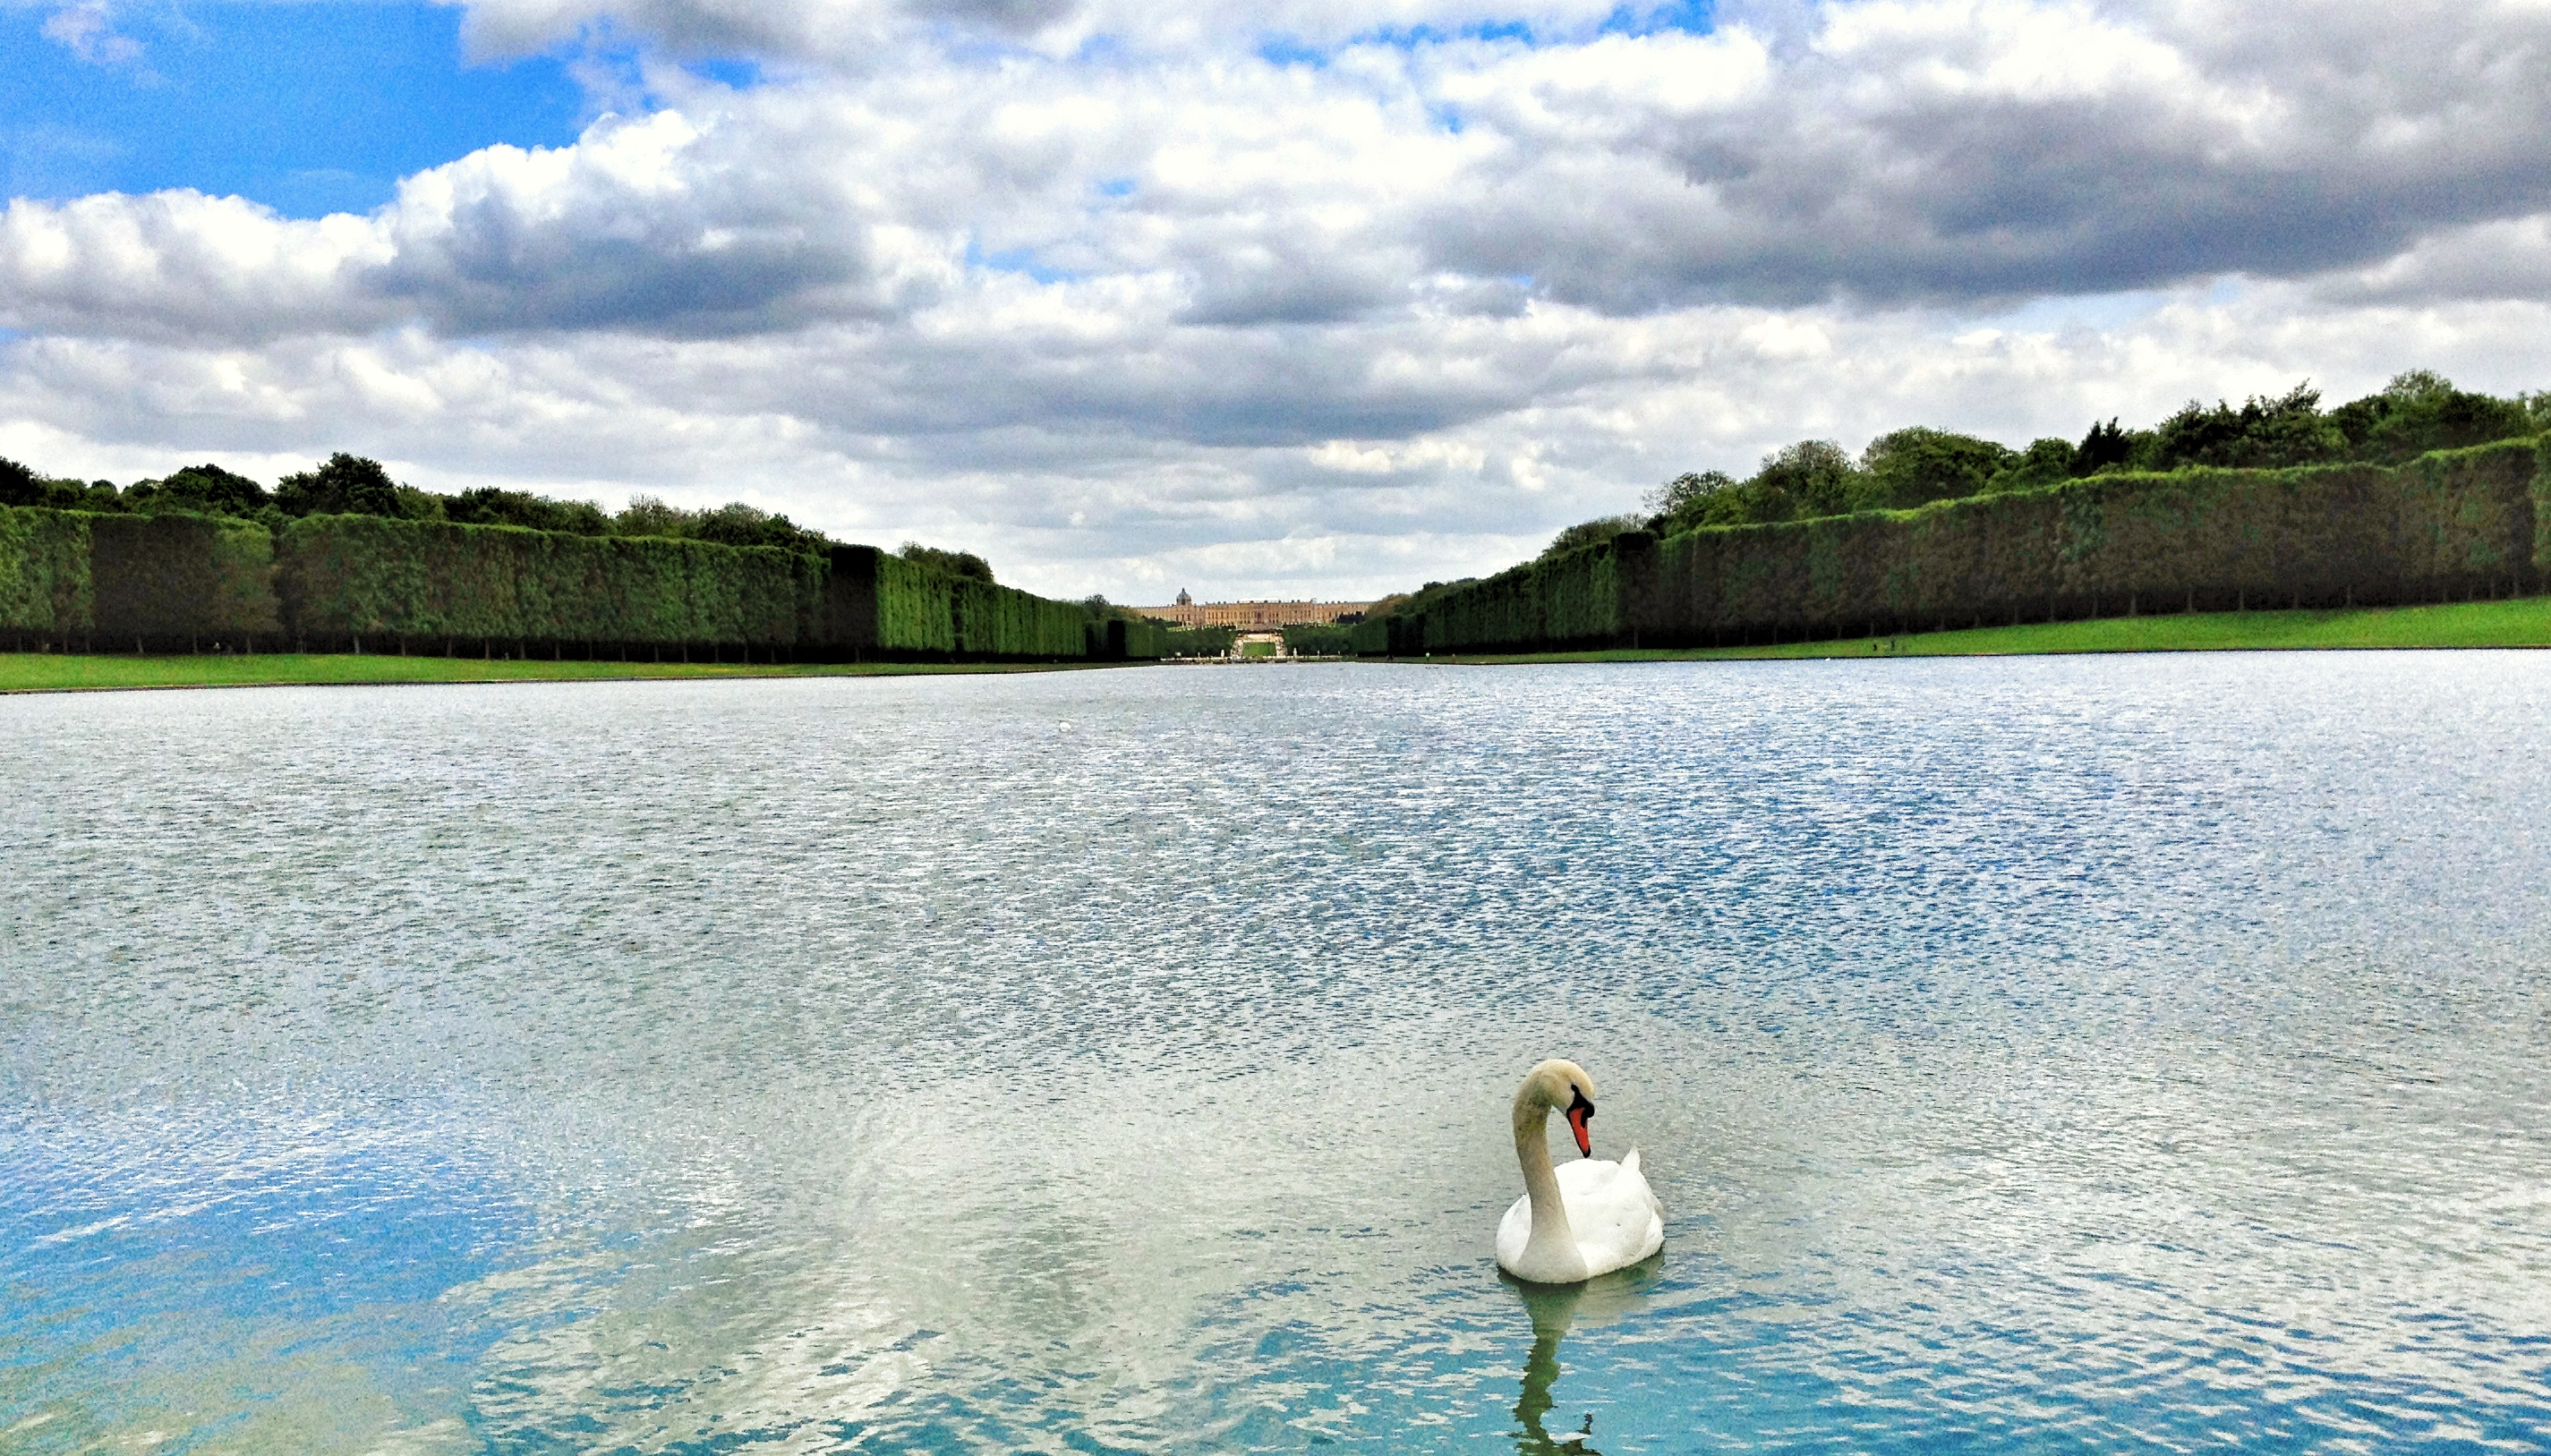 A swan posing in the lake in front of Chateau de Versailles. (Getty Images)